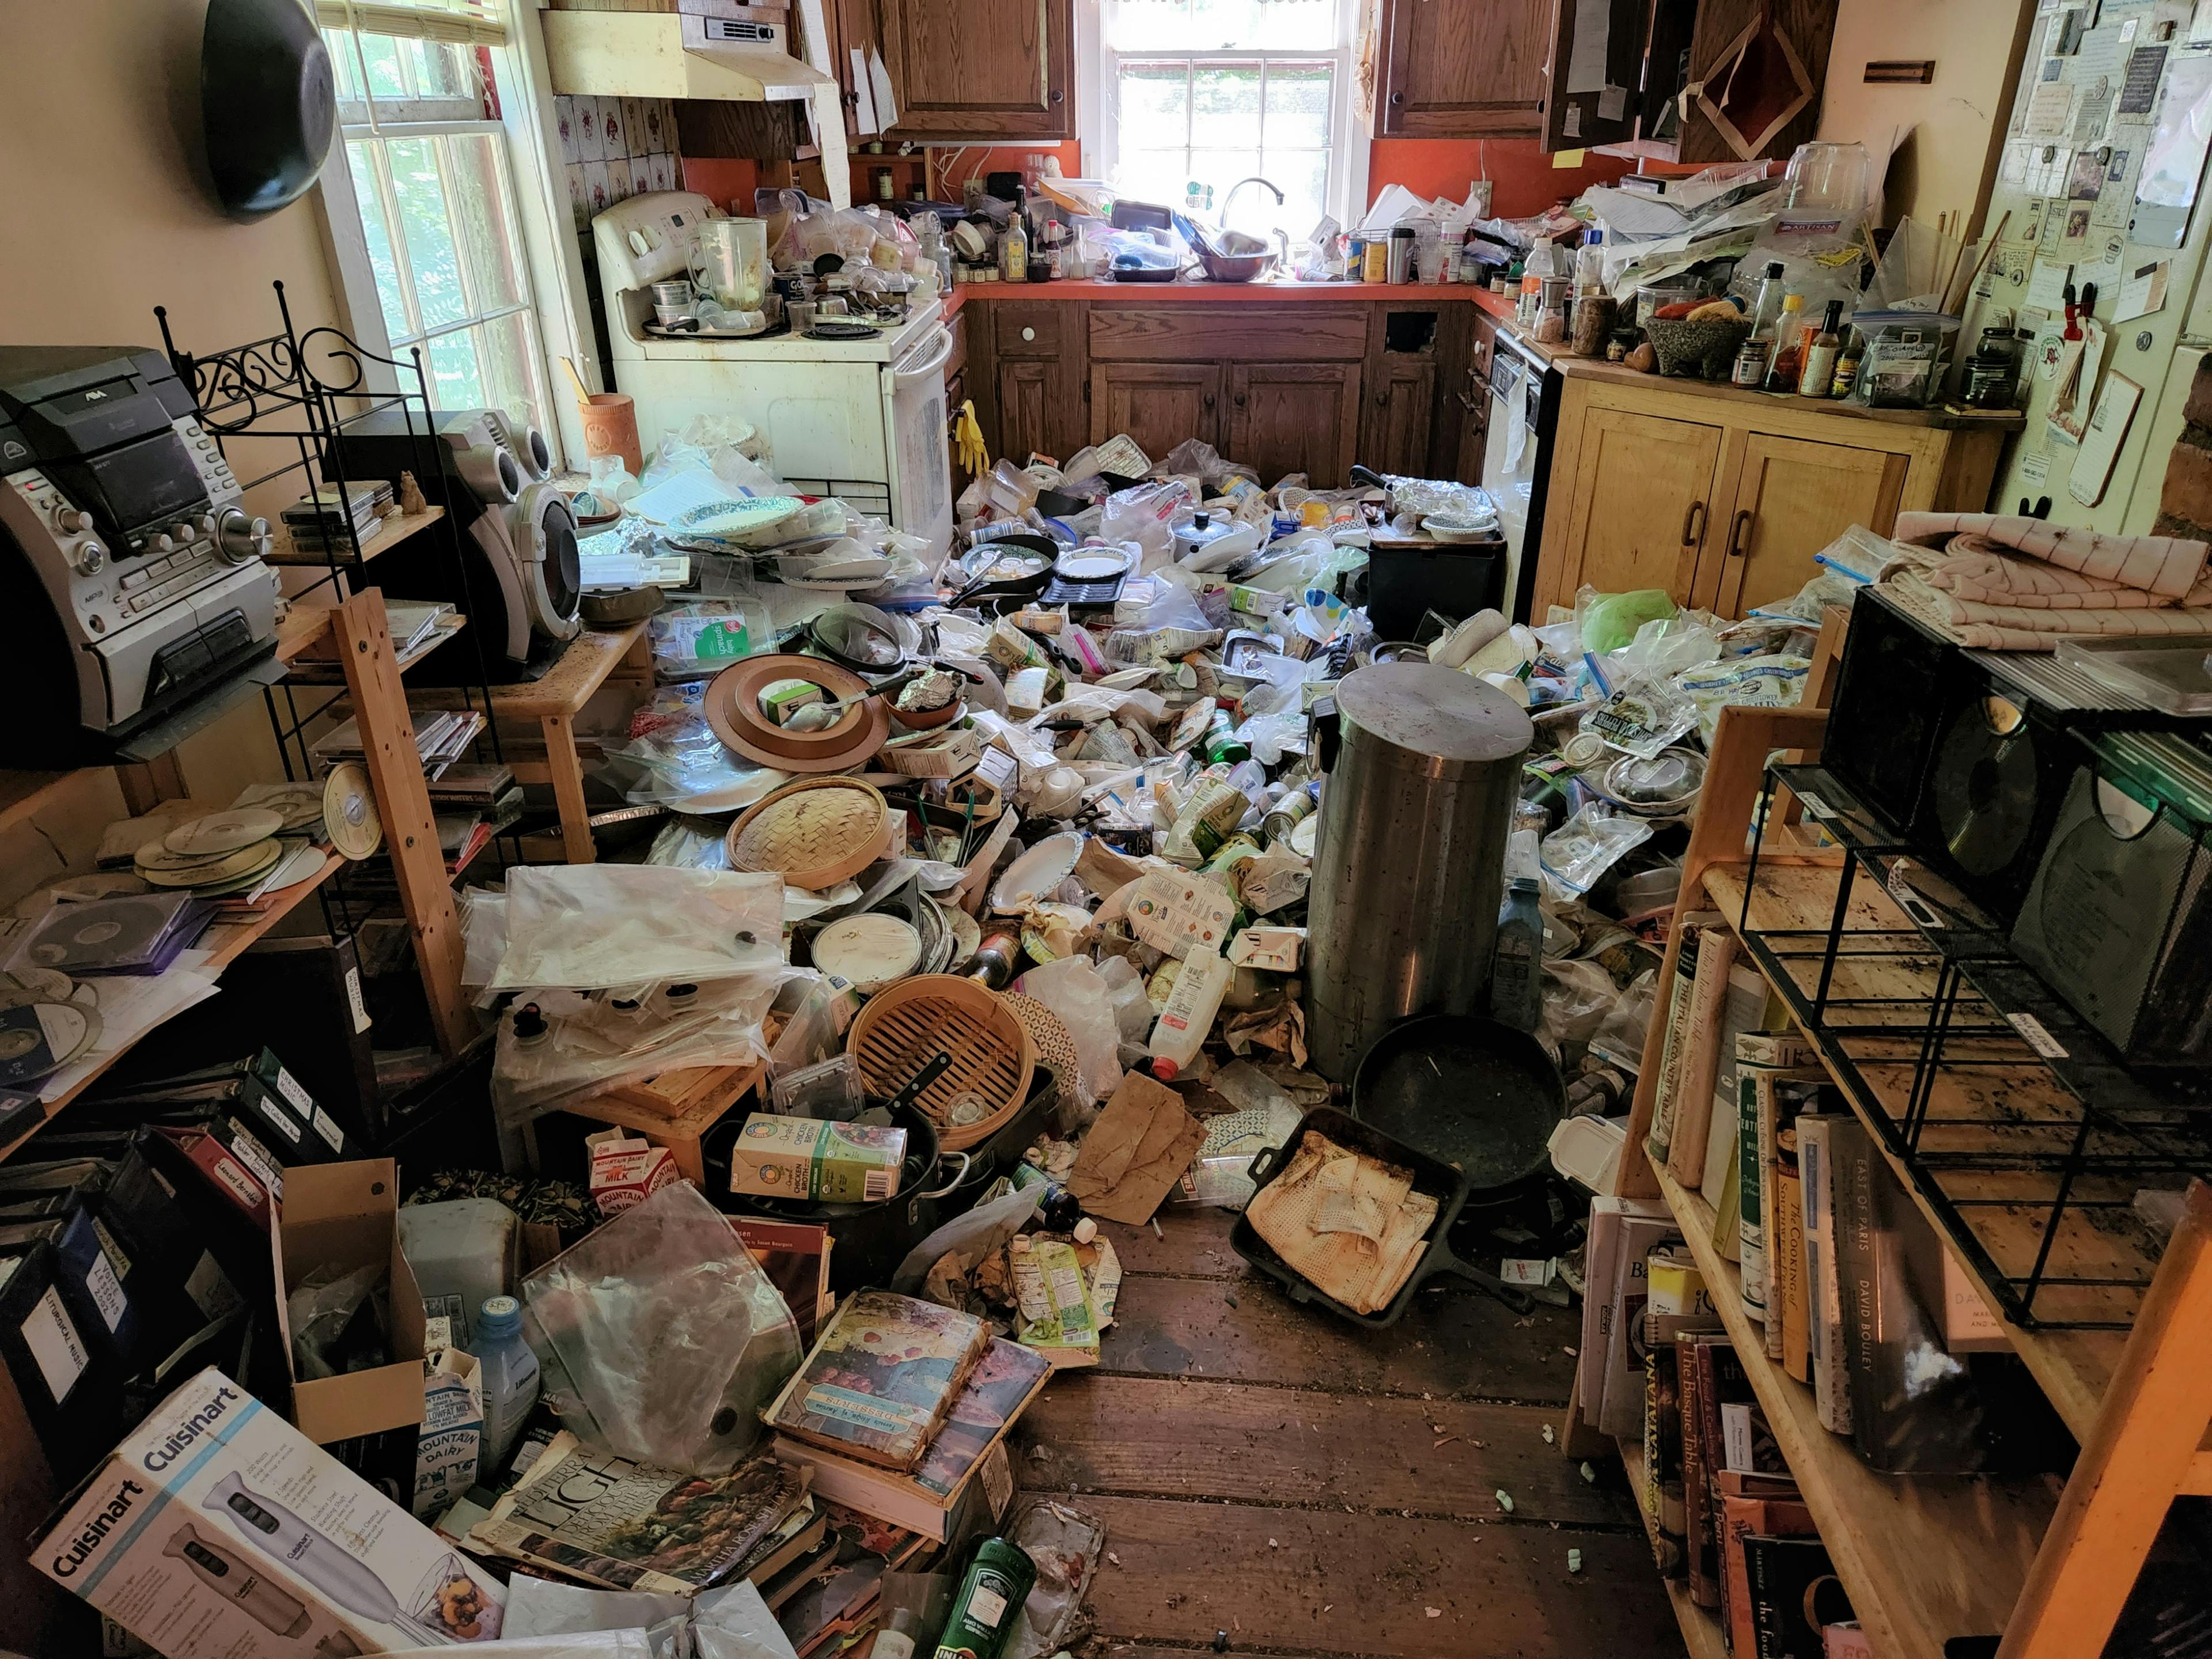 Local decluttering services (5 hours)